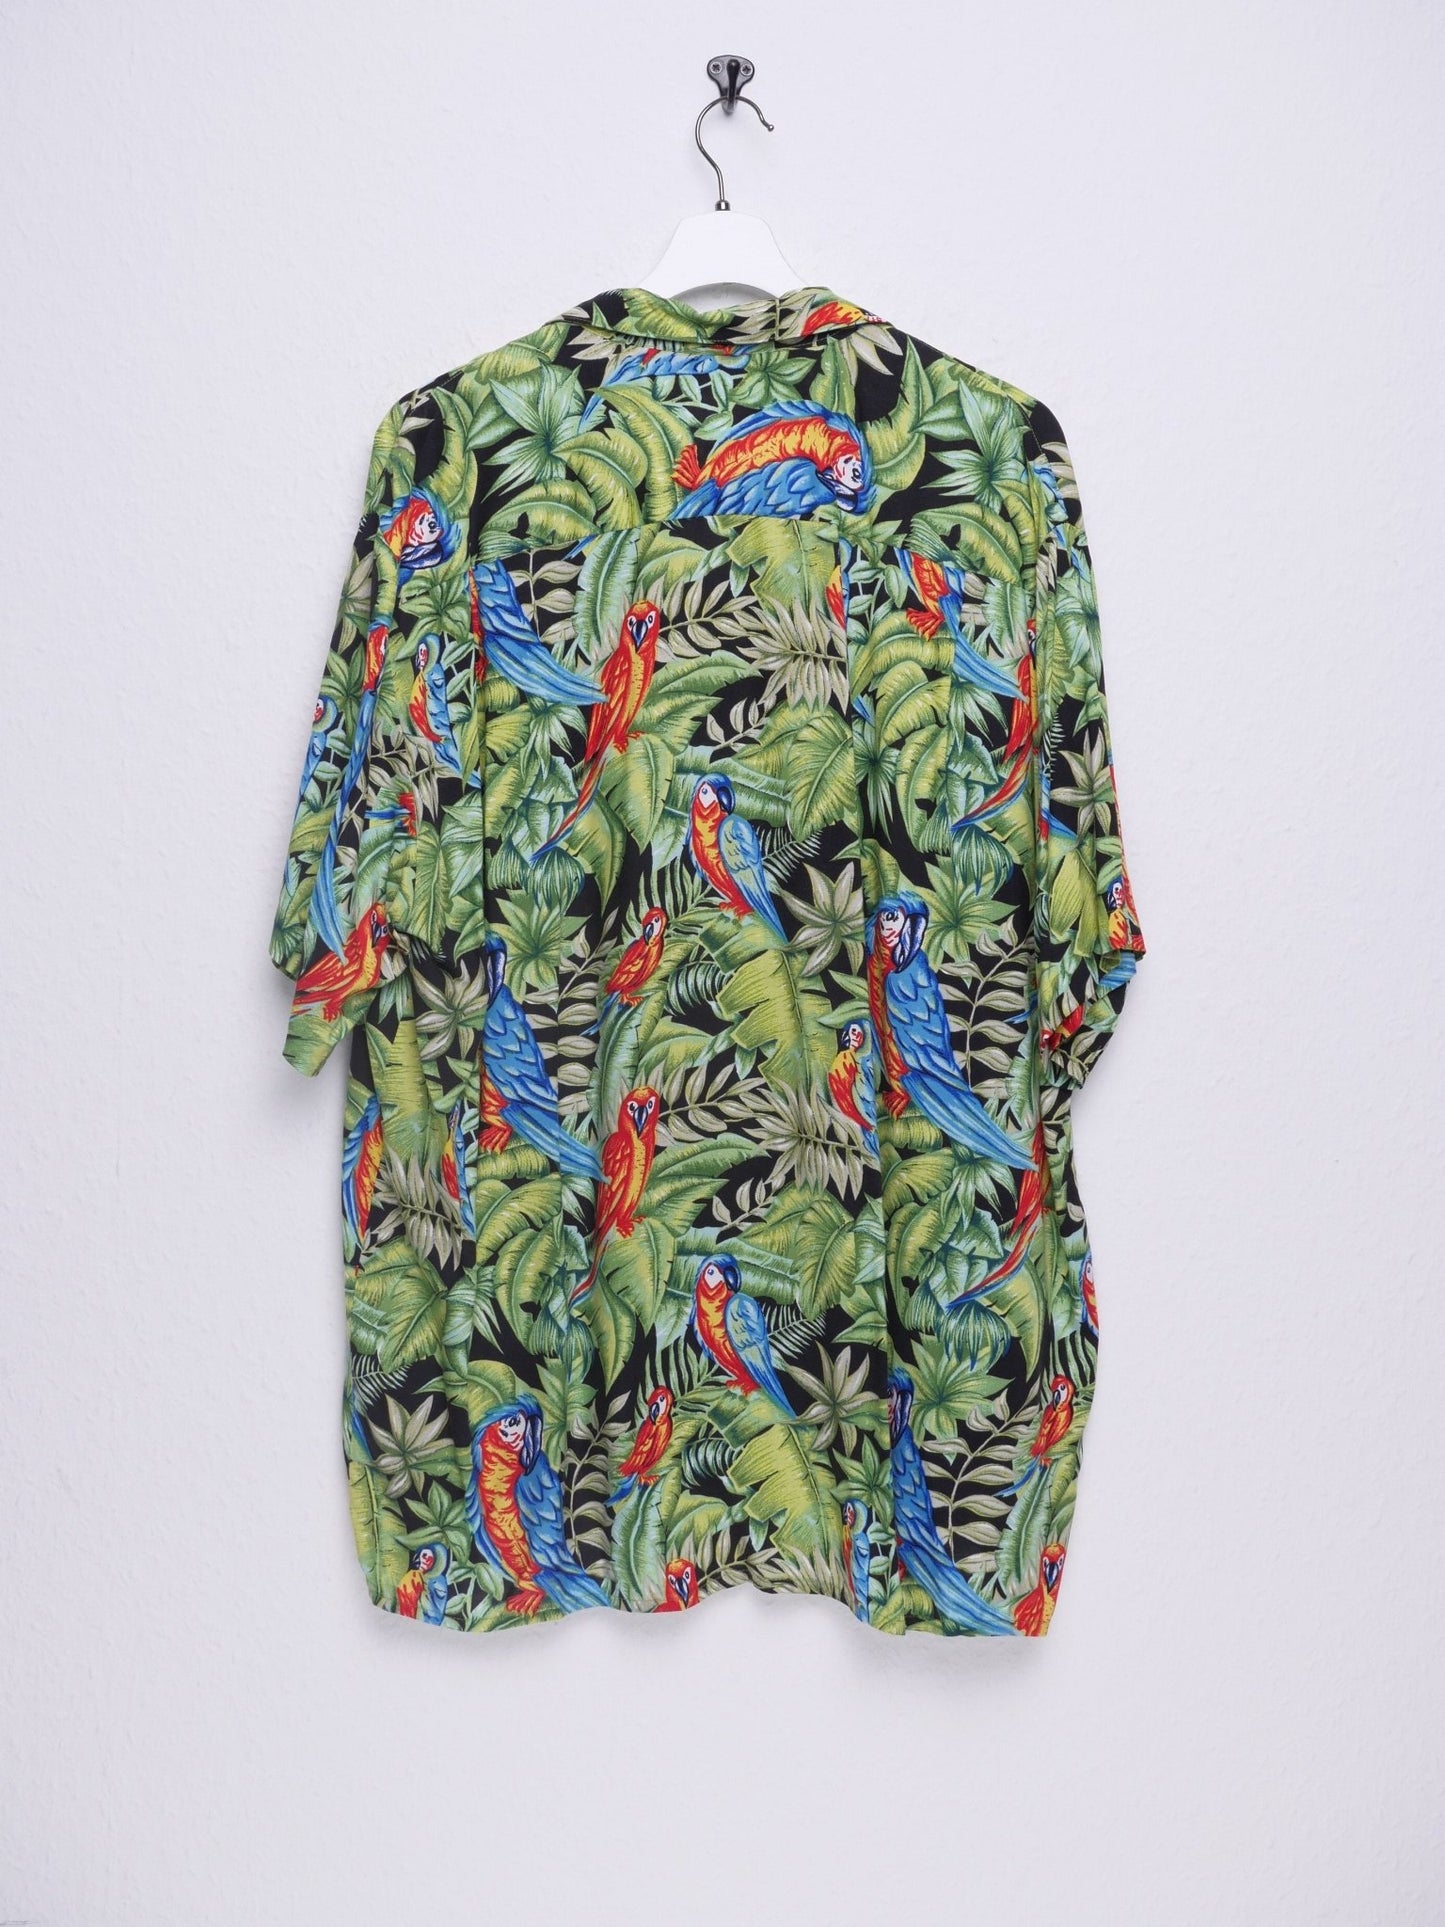 Parrot printed Graphic Vintage S/S Hemd - Peeces